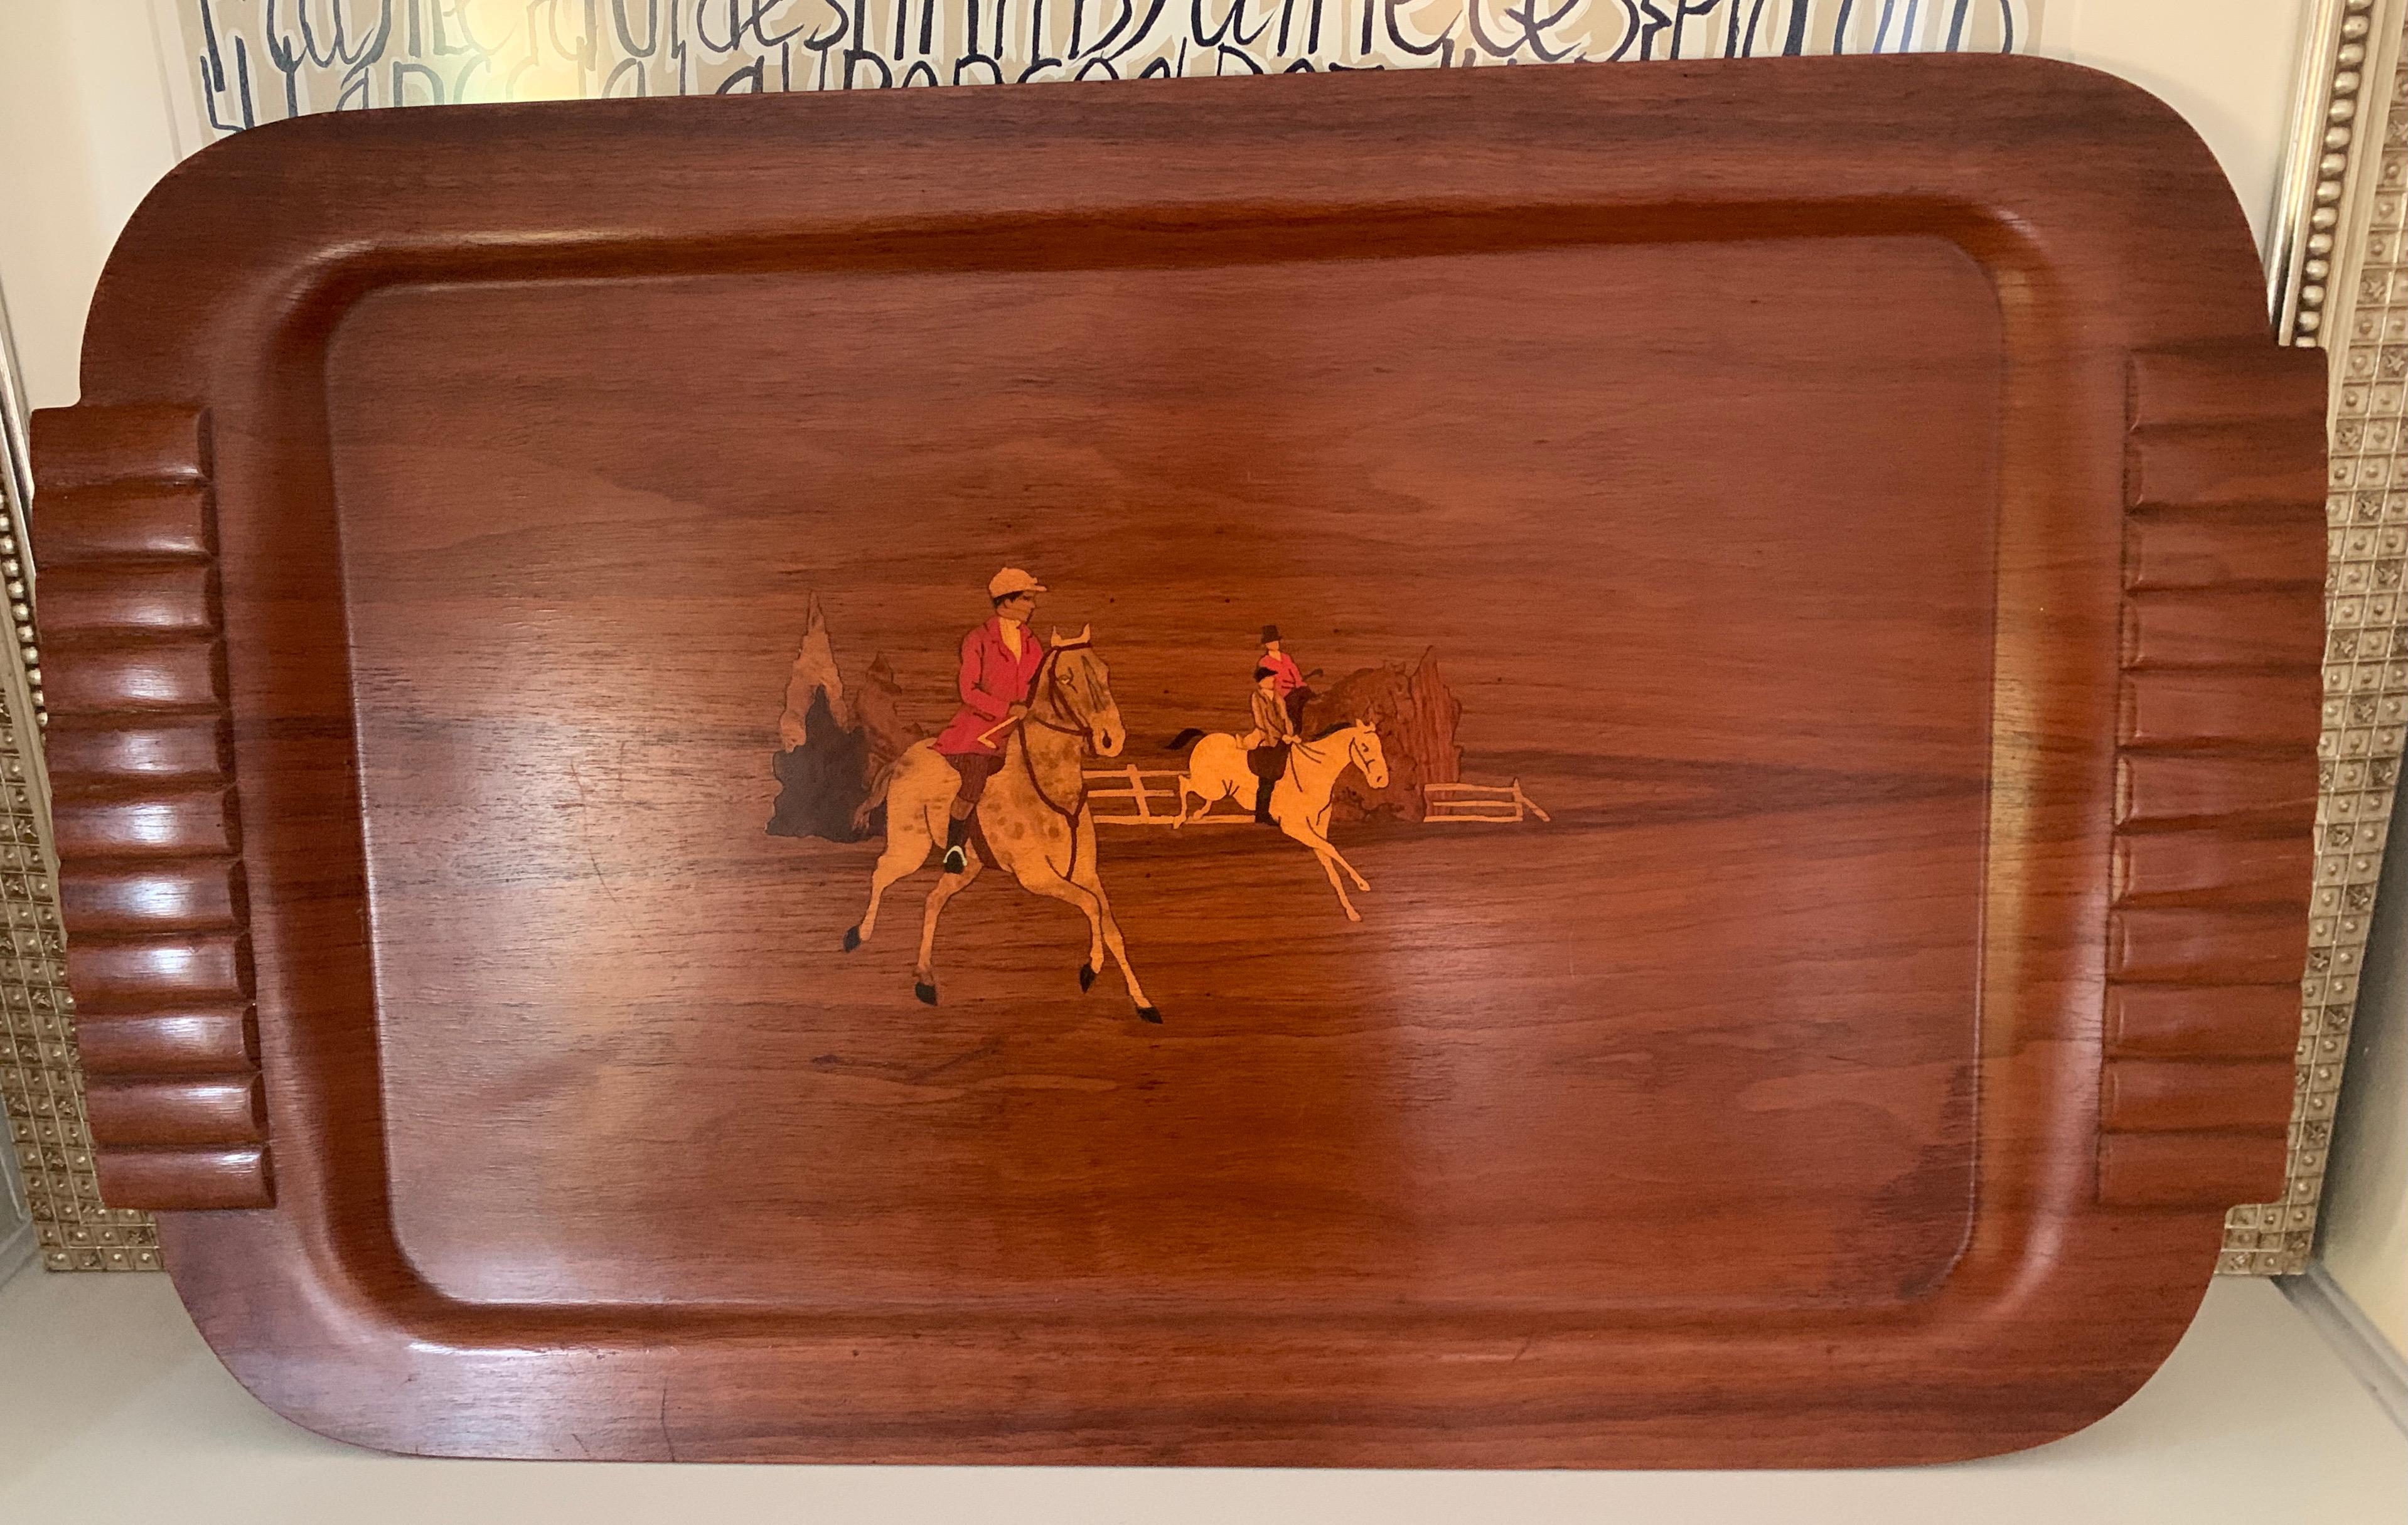 Very large serving tray depicting Horses jumping hurdles - a compliment to many spaces, and especially those with a Ralph Lauren, Polo, or horse riding 